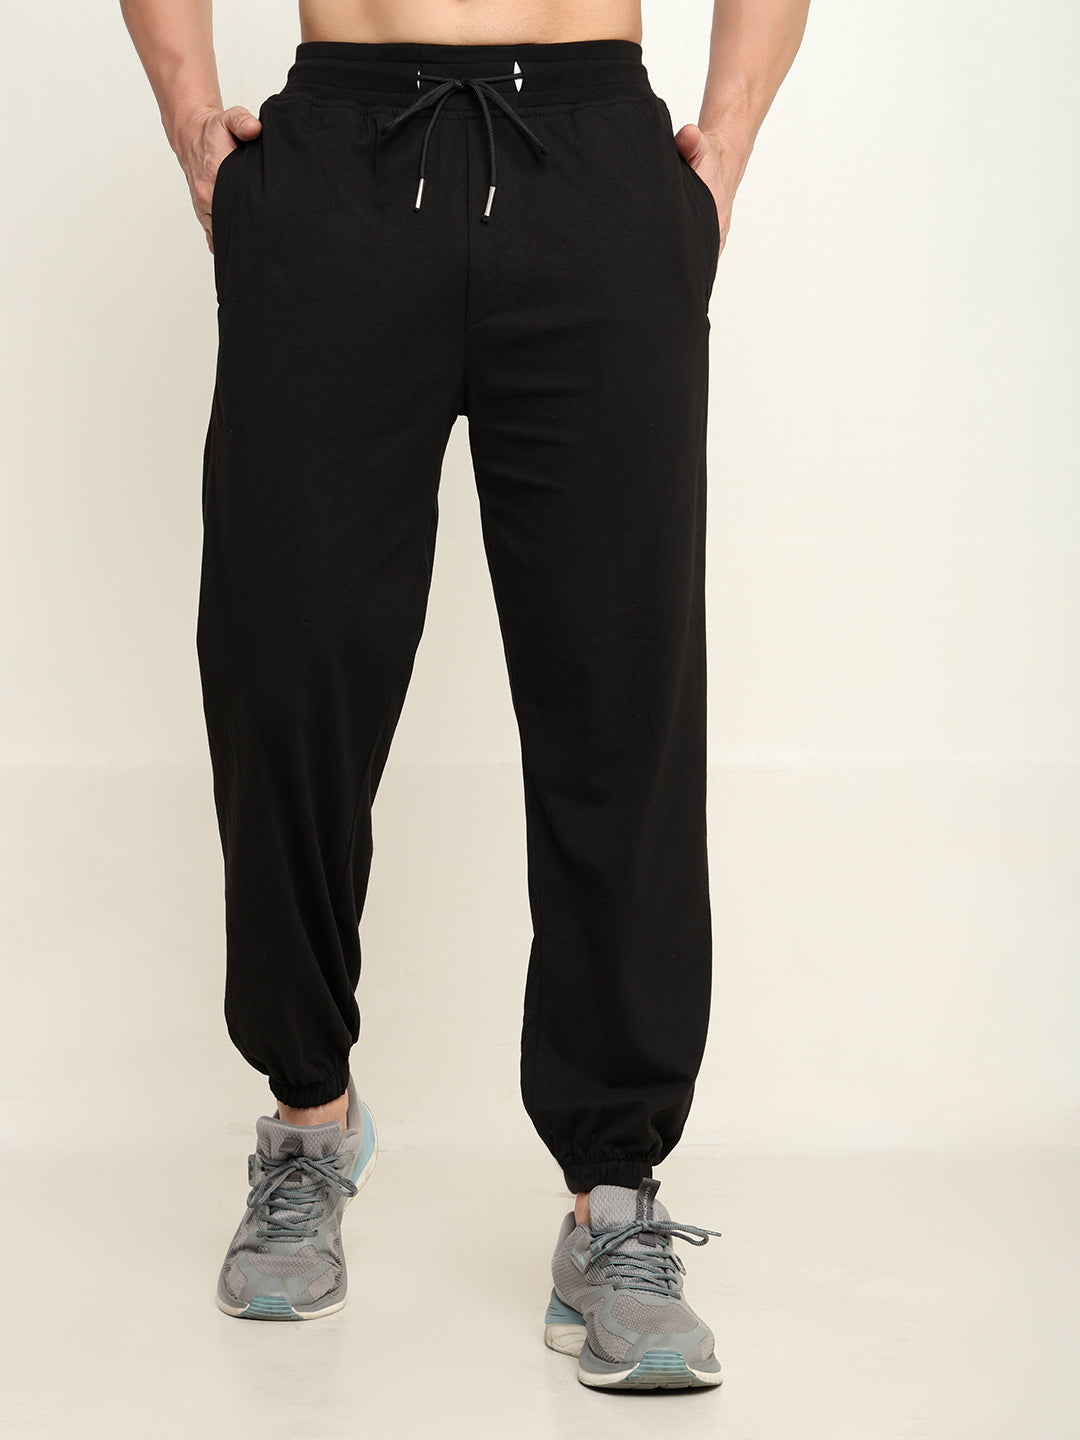 Breathable Loose Fit Cotton Track Pant for Men.(Black)